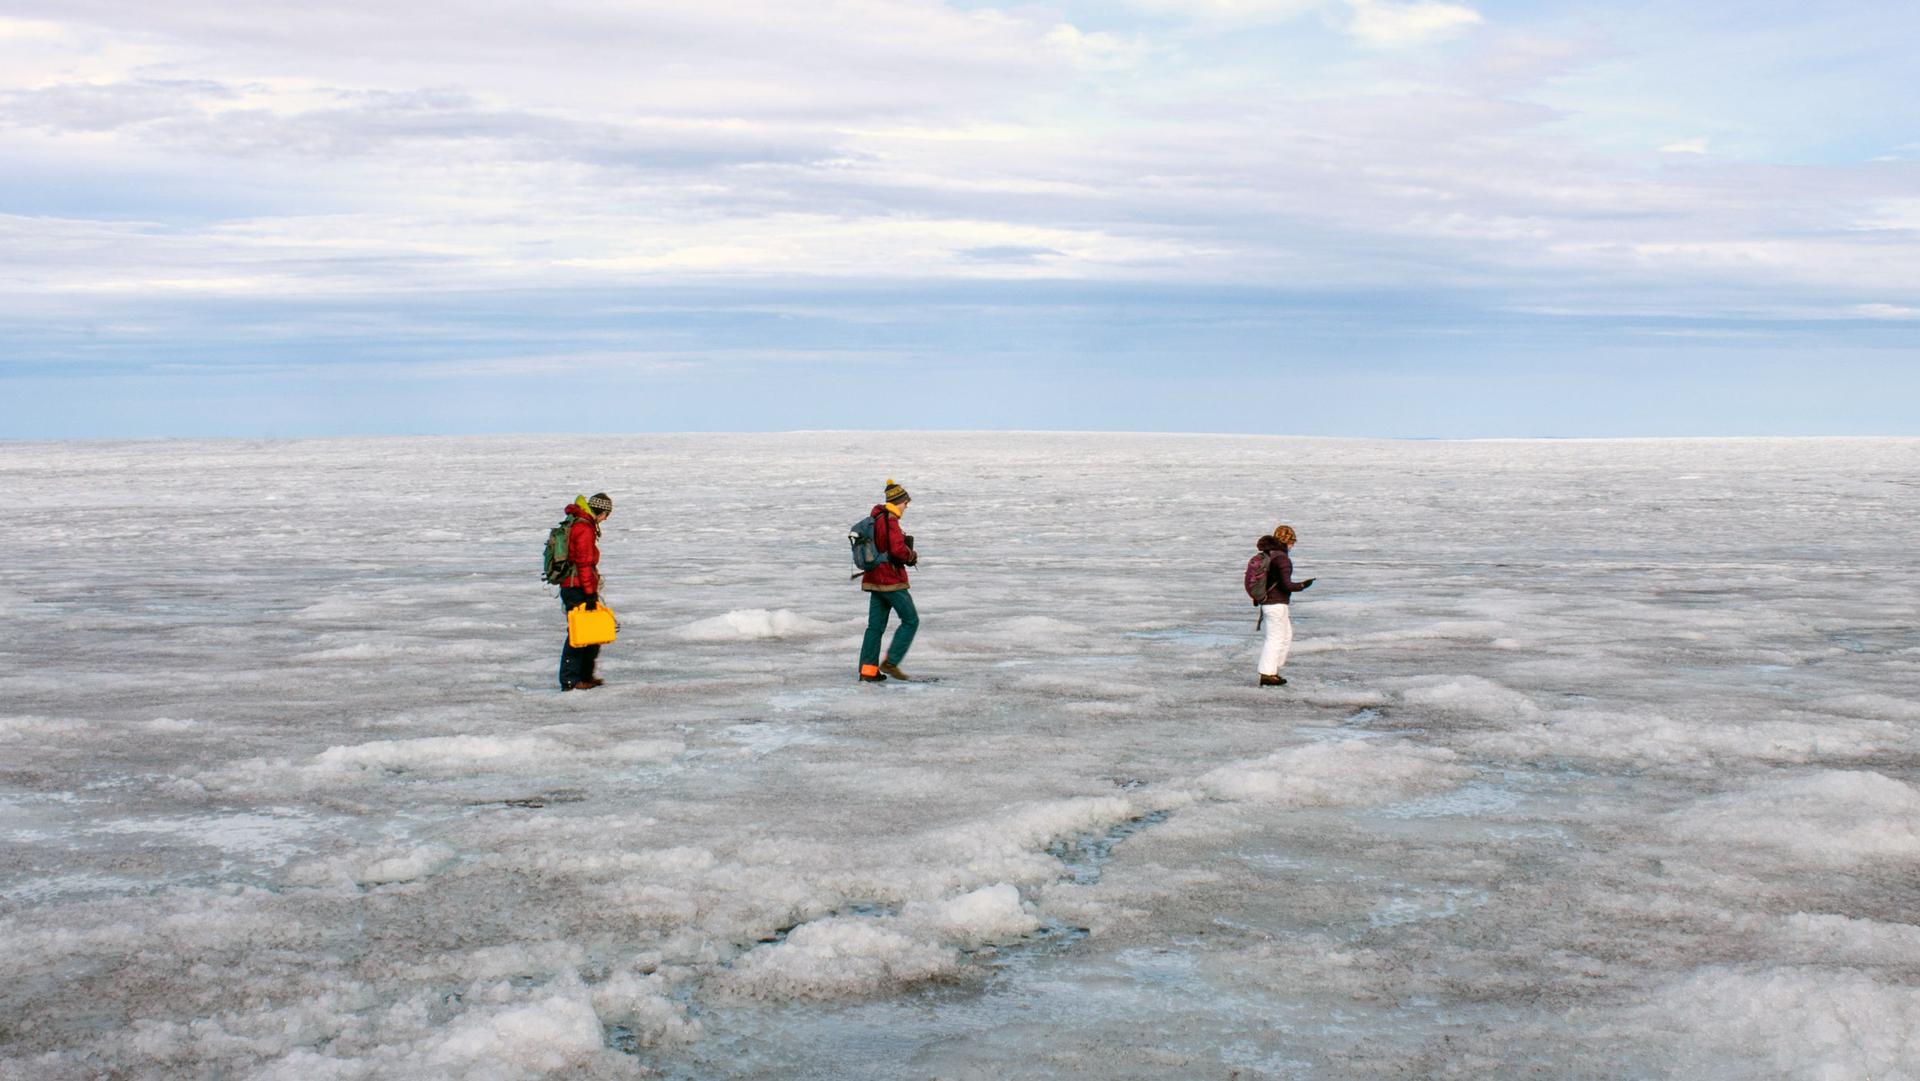 Three people walk across ground covered in ice and snow as the horizon stretches behind them.